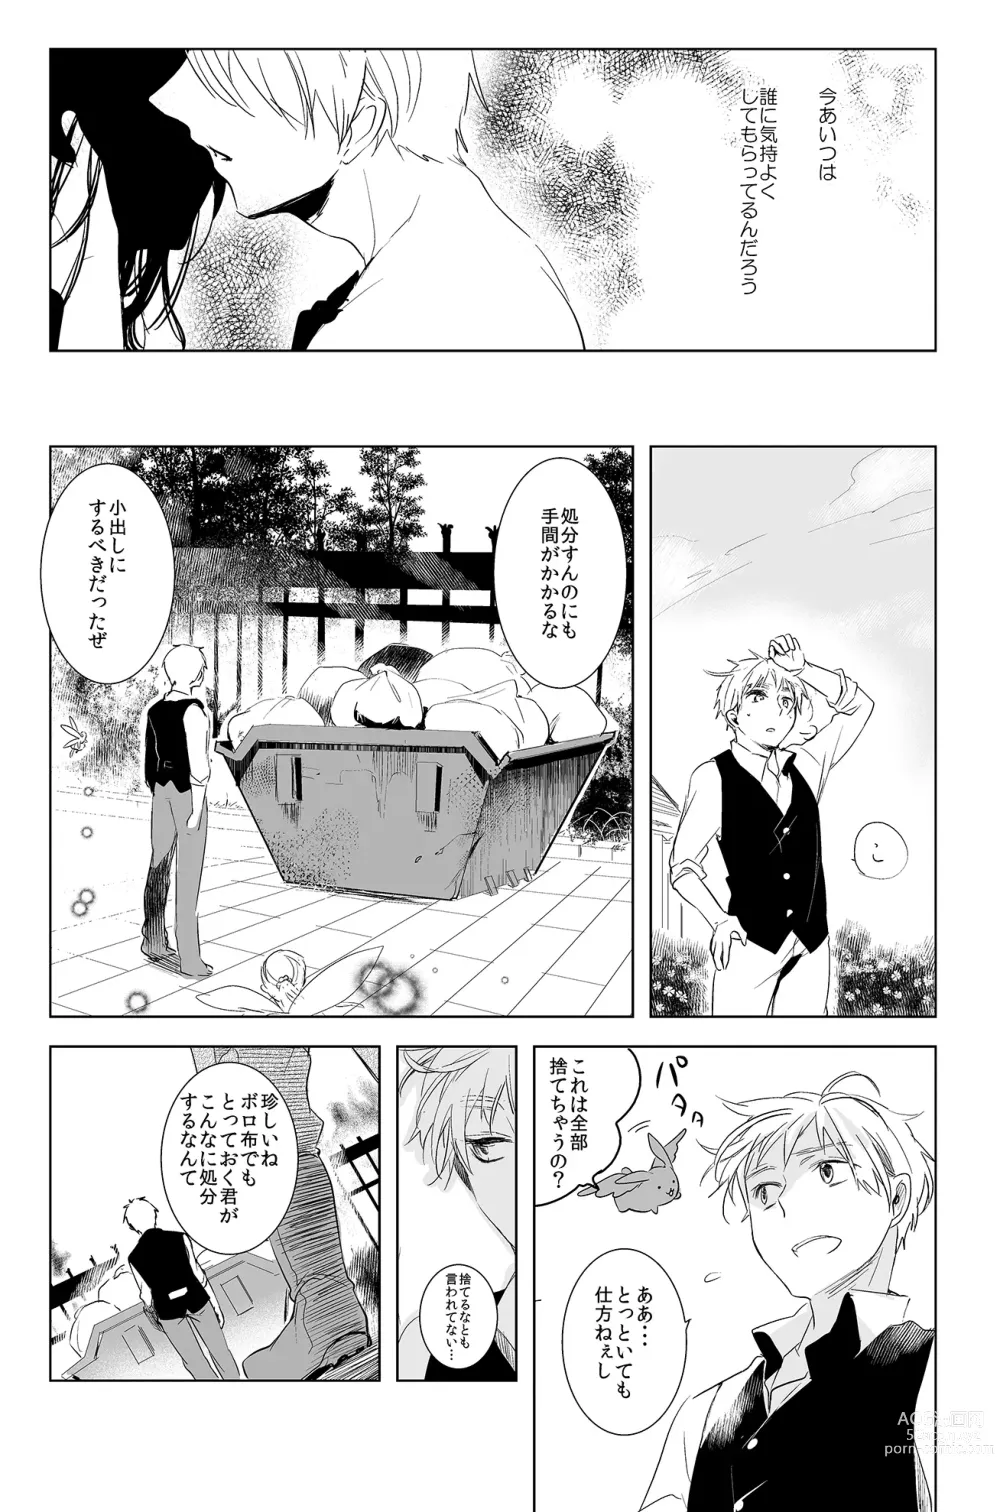 Page 7 of doujinshi Faint Promise